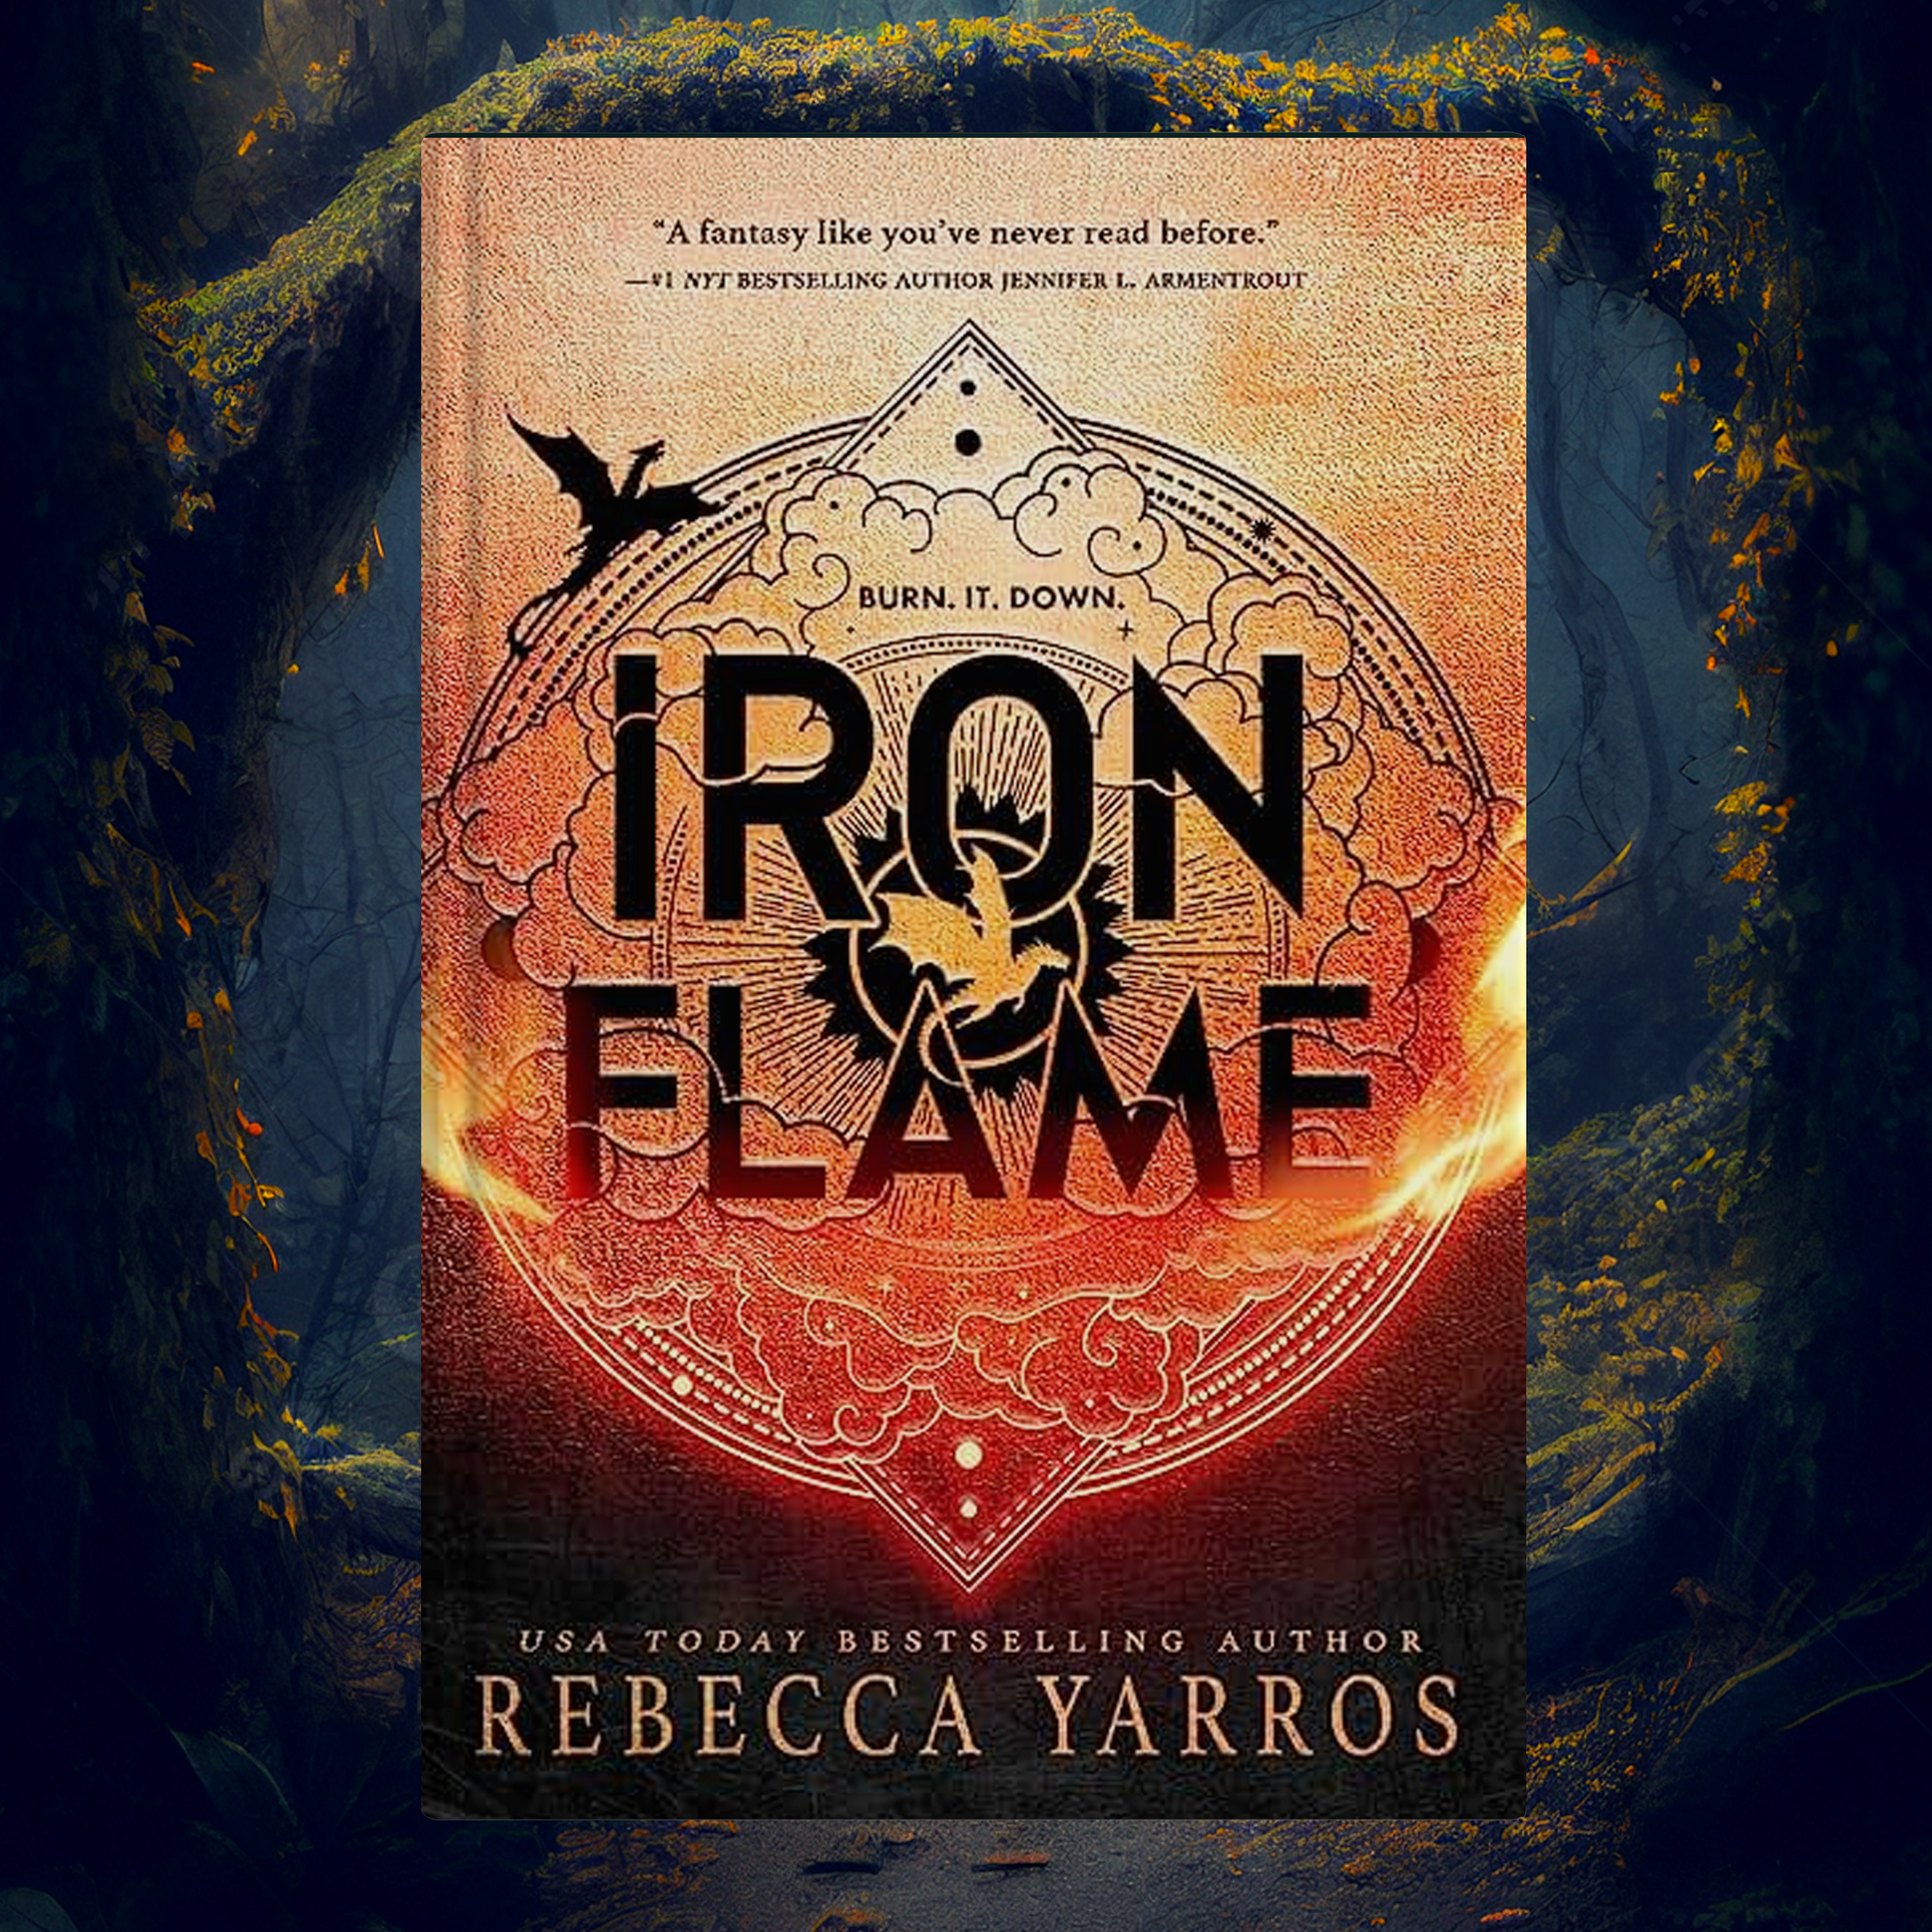 3 Printable Iron Flame Bookmarks, Inspired by the Much-anticipated Second  Book in the Empyrean Series, iron Flame 